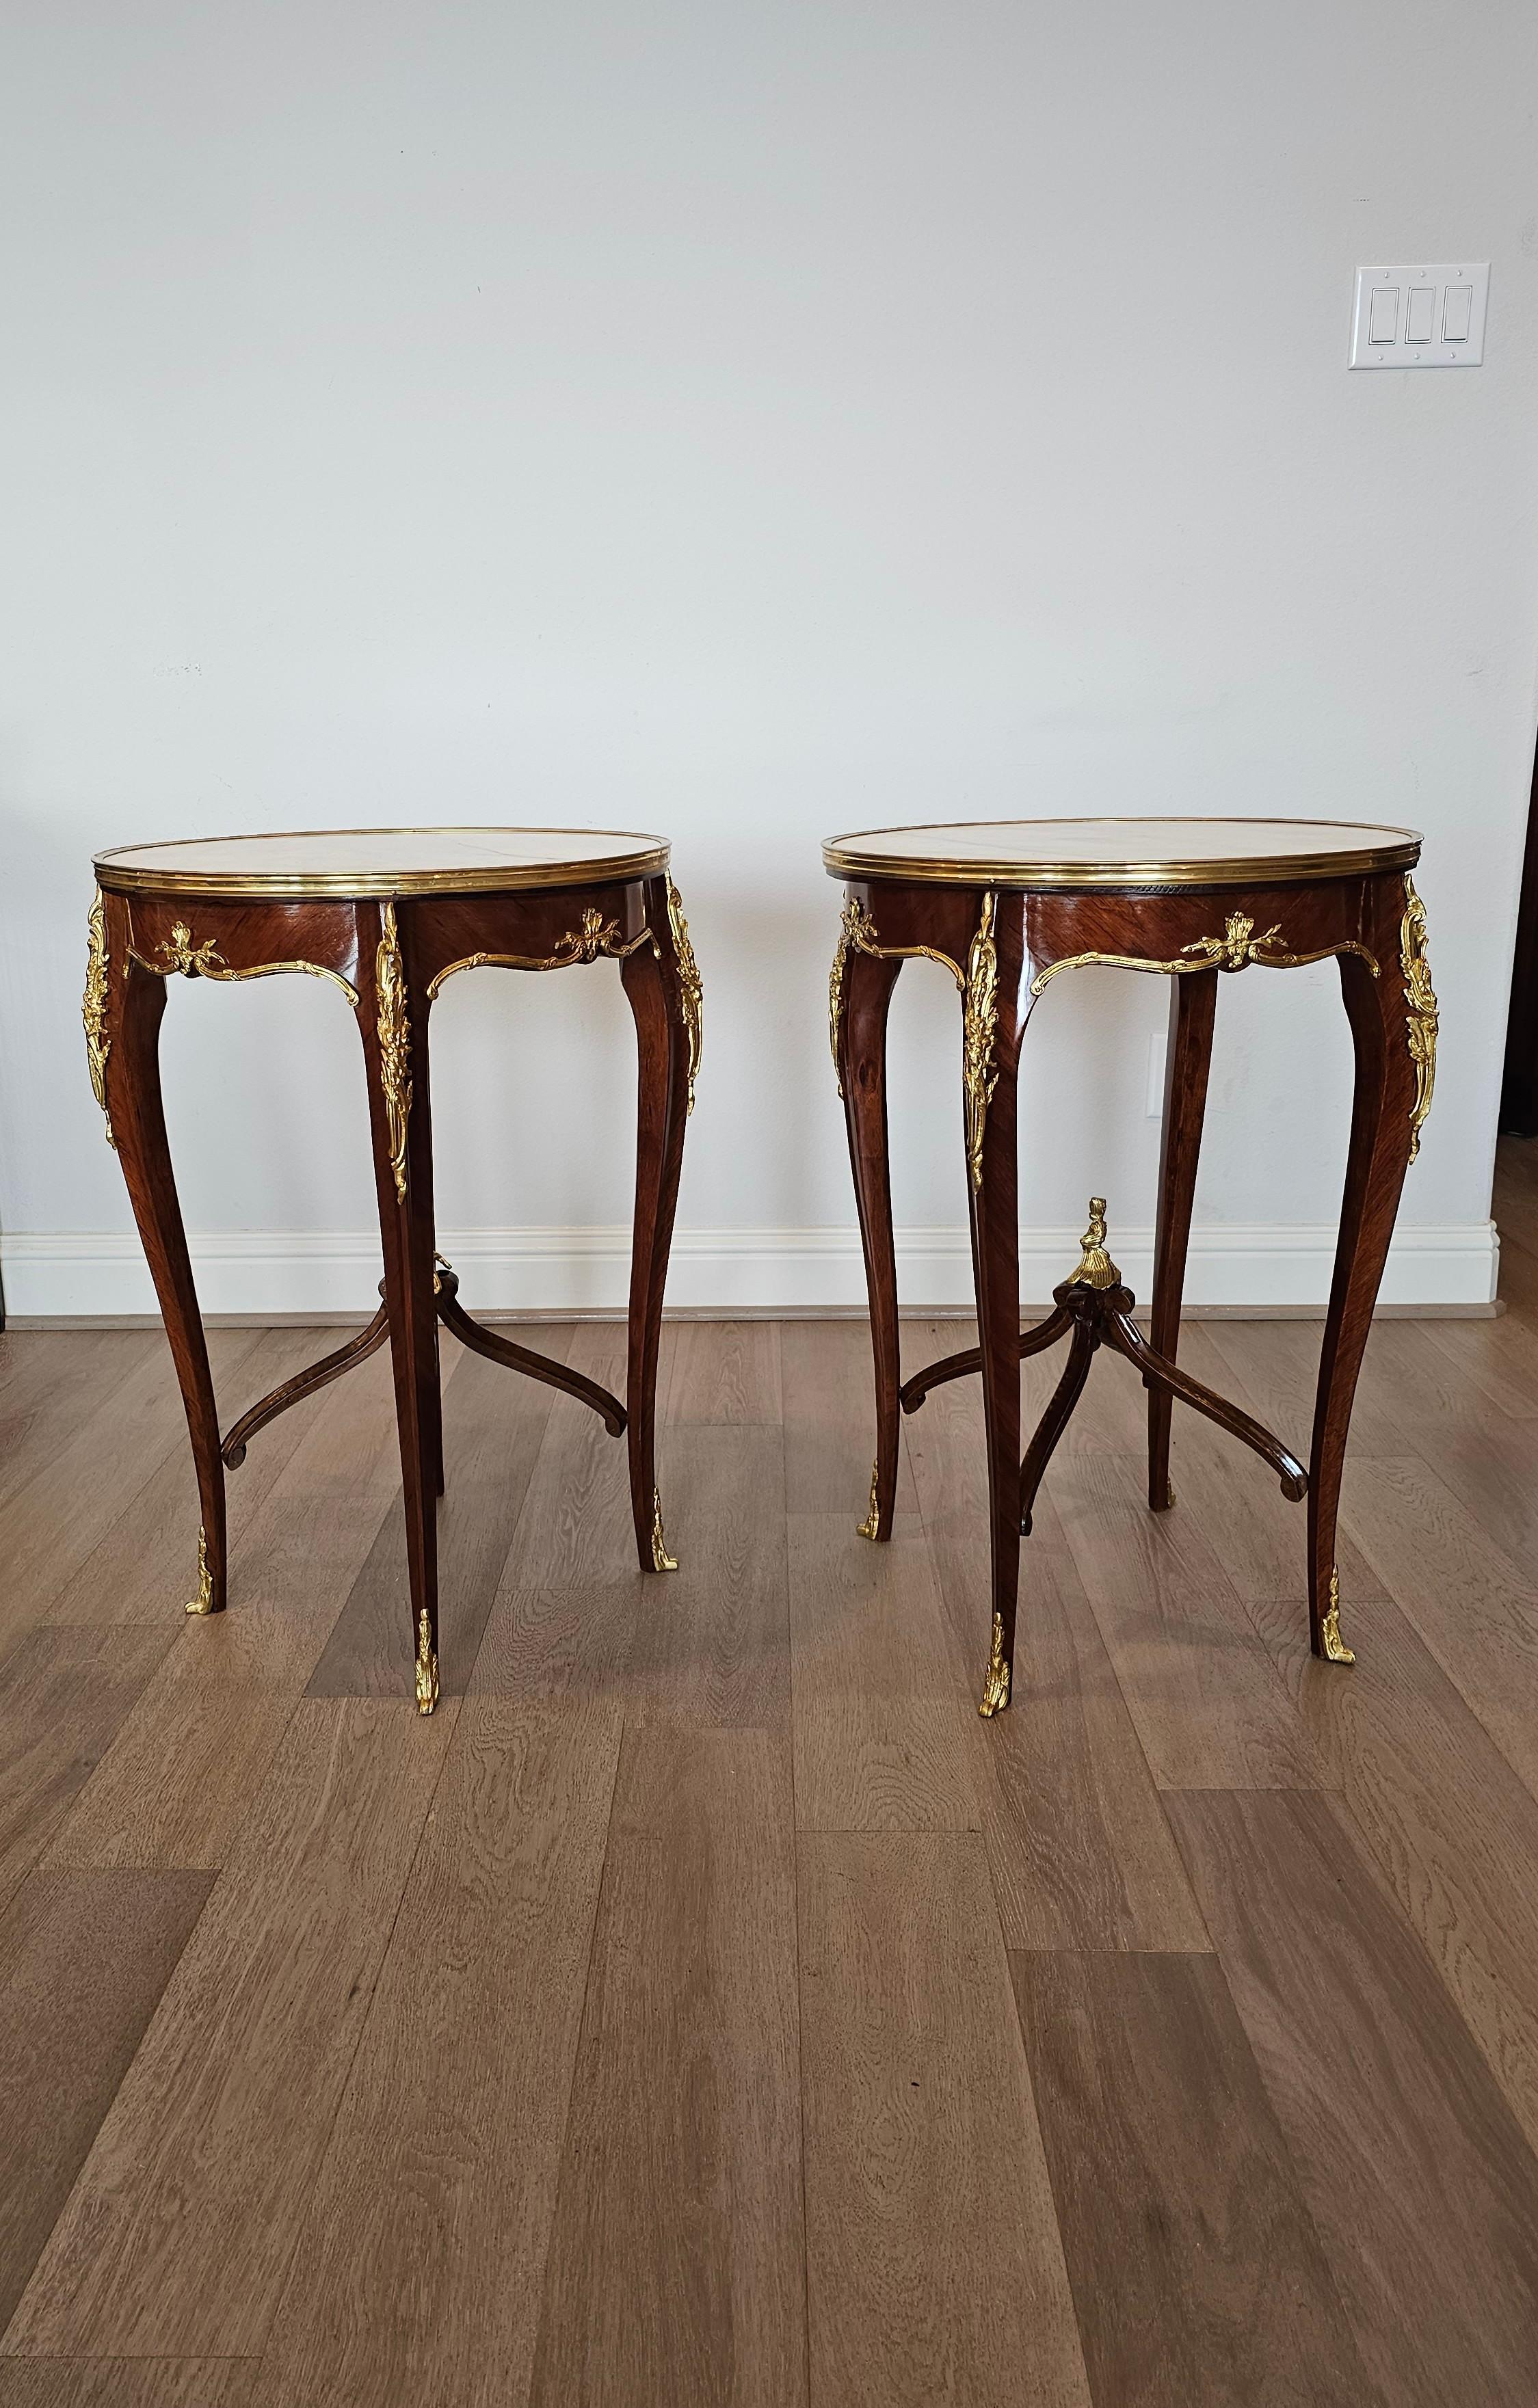 Pair of French Louis XV Style Gilt Bronze Mounted Kingwood Side Tables In Good Condition For Sale In Forney, TX